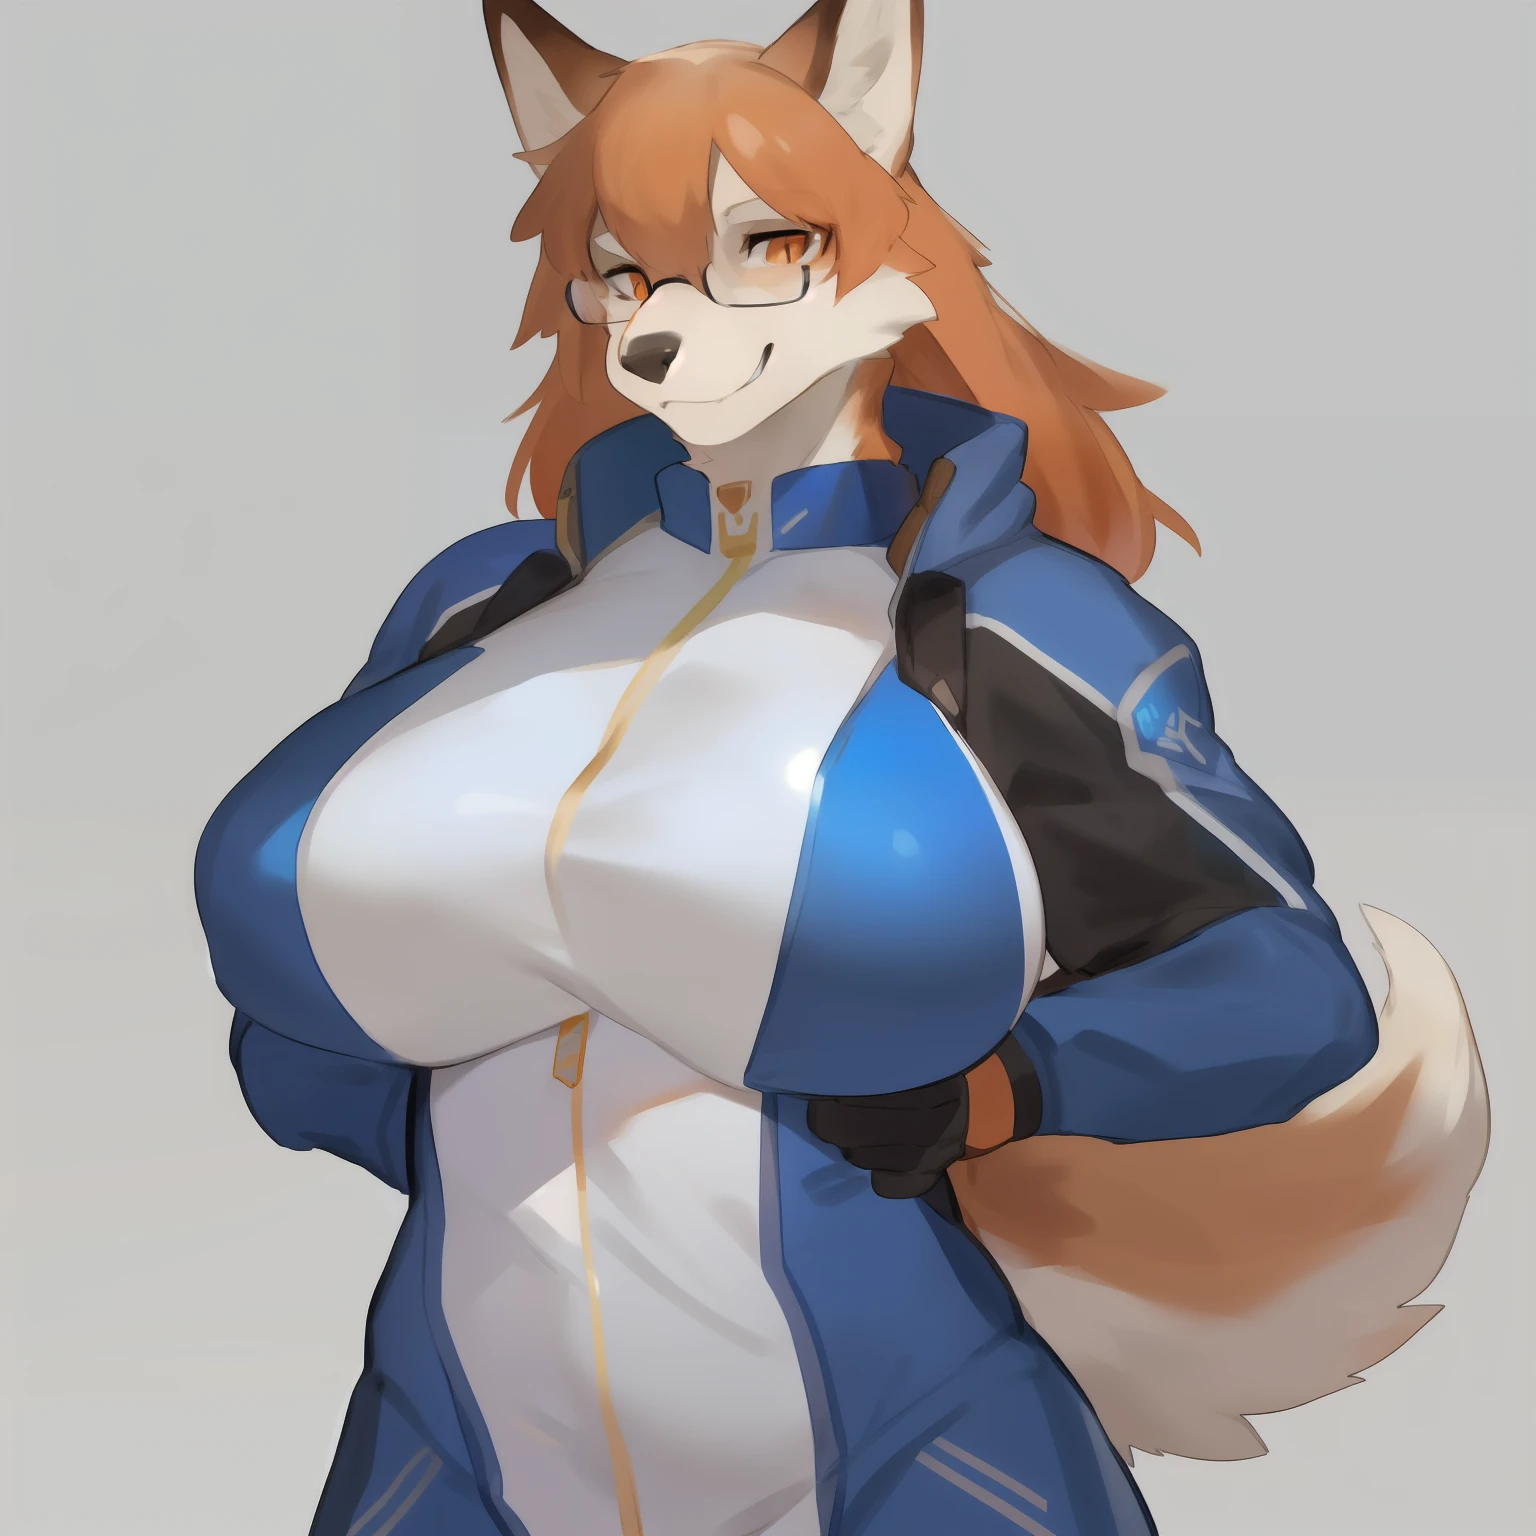 Solo, standing, female, big breasts, canine, white fur, orange eyes, orange hair, glasses, muscular, blue military spacesuit, By bebebebebe, by buta99, by chunie, by sonsasu, by danza